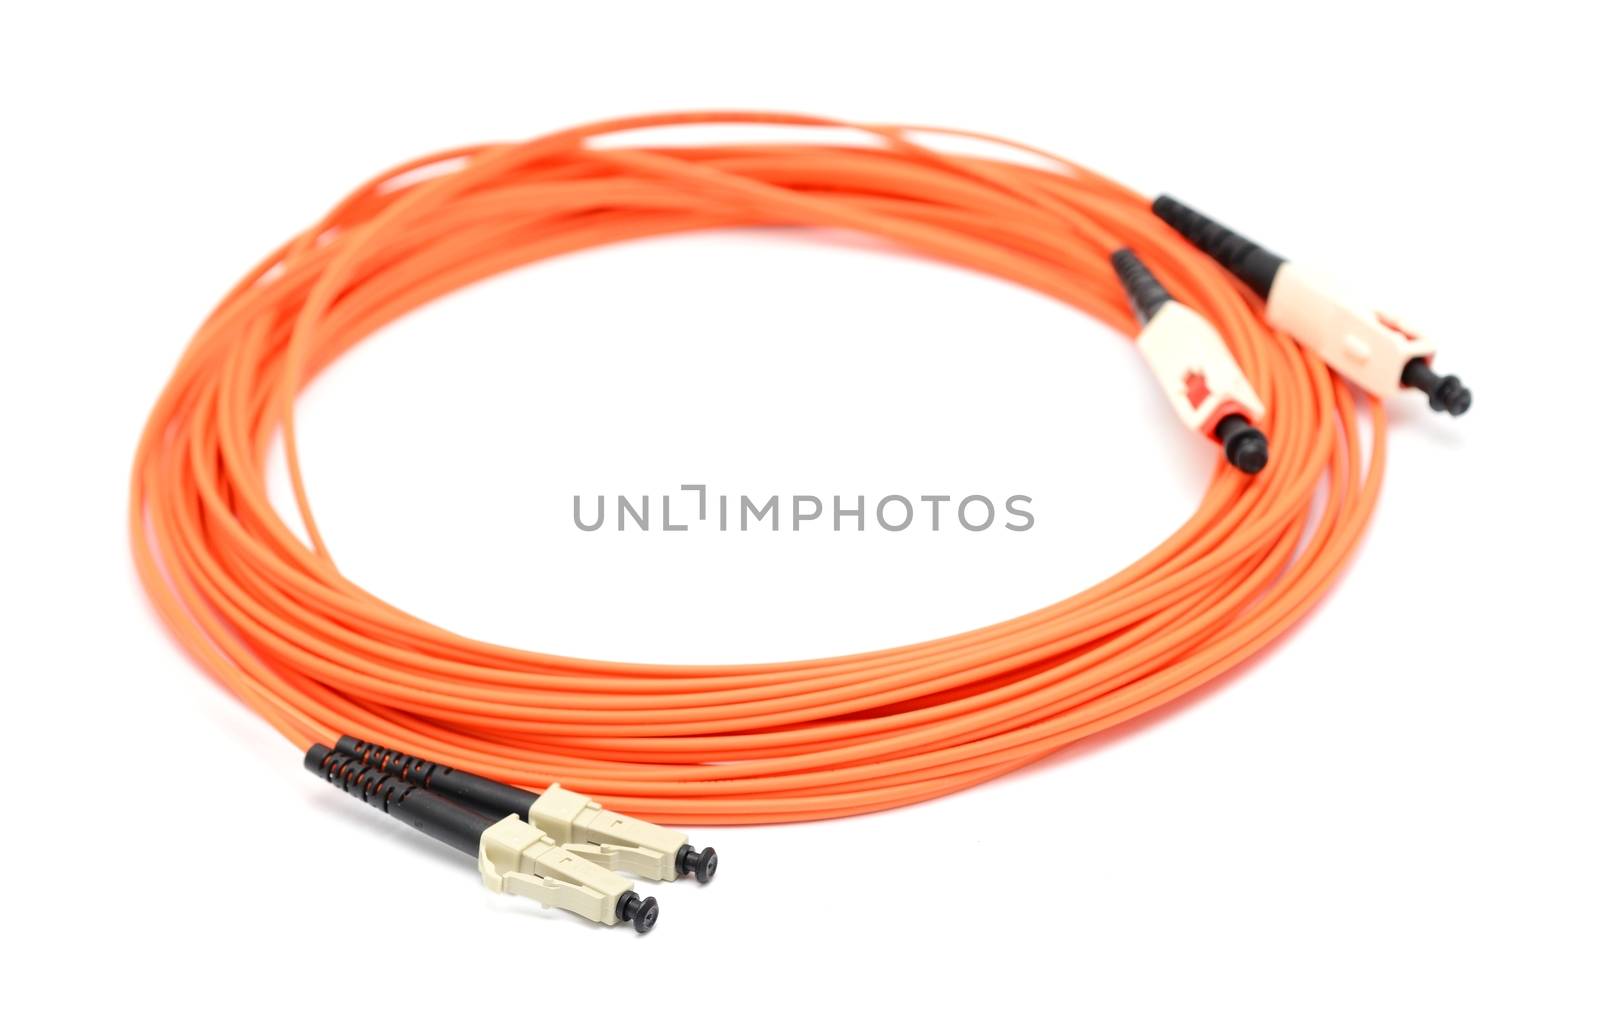 Optical cable by hamik